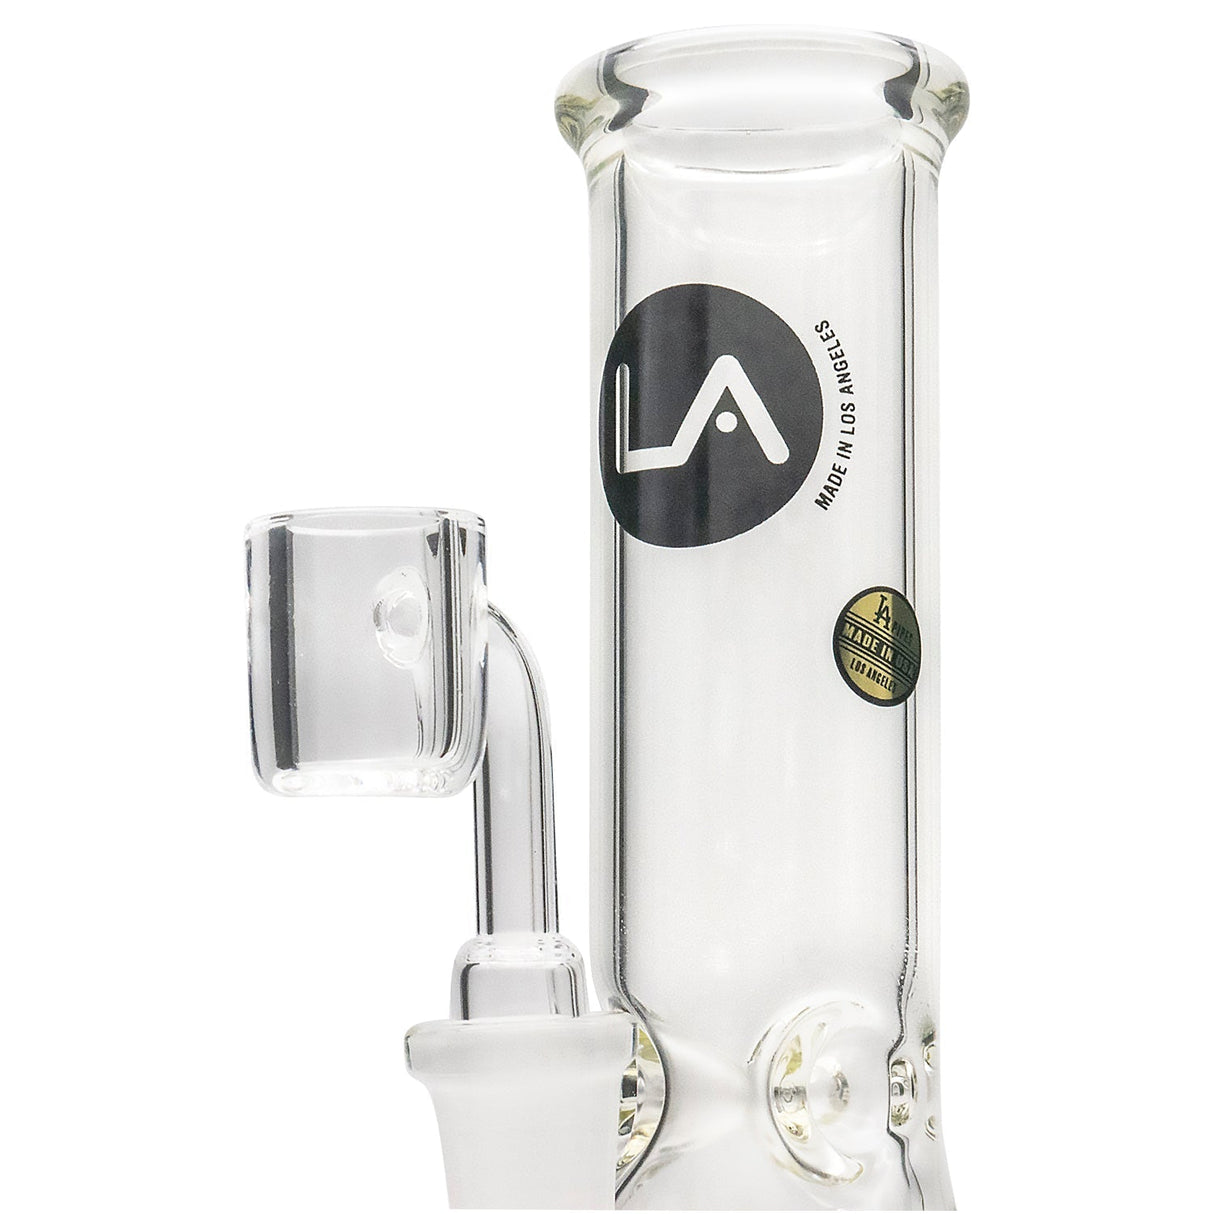 LA Pipes Classic Beaker Concentrate Rig with Quartz Banger, Front View, USA Made